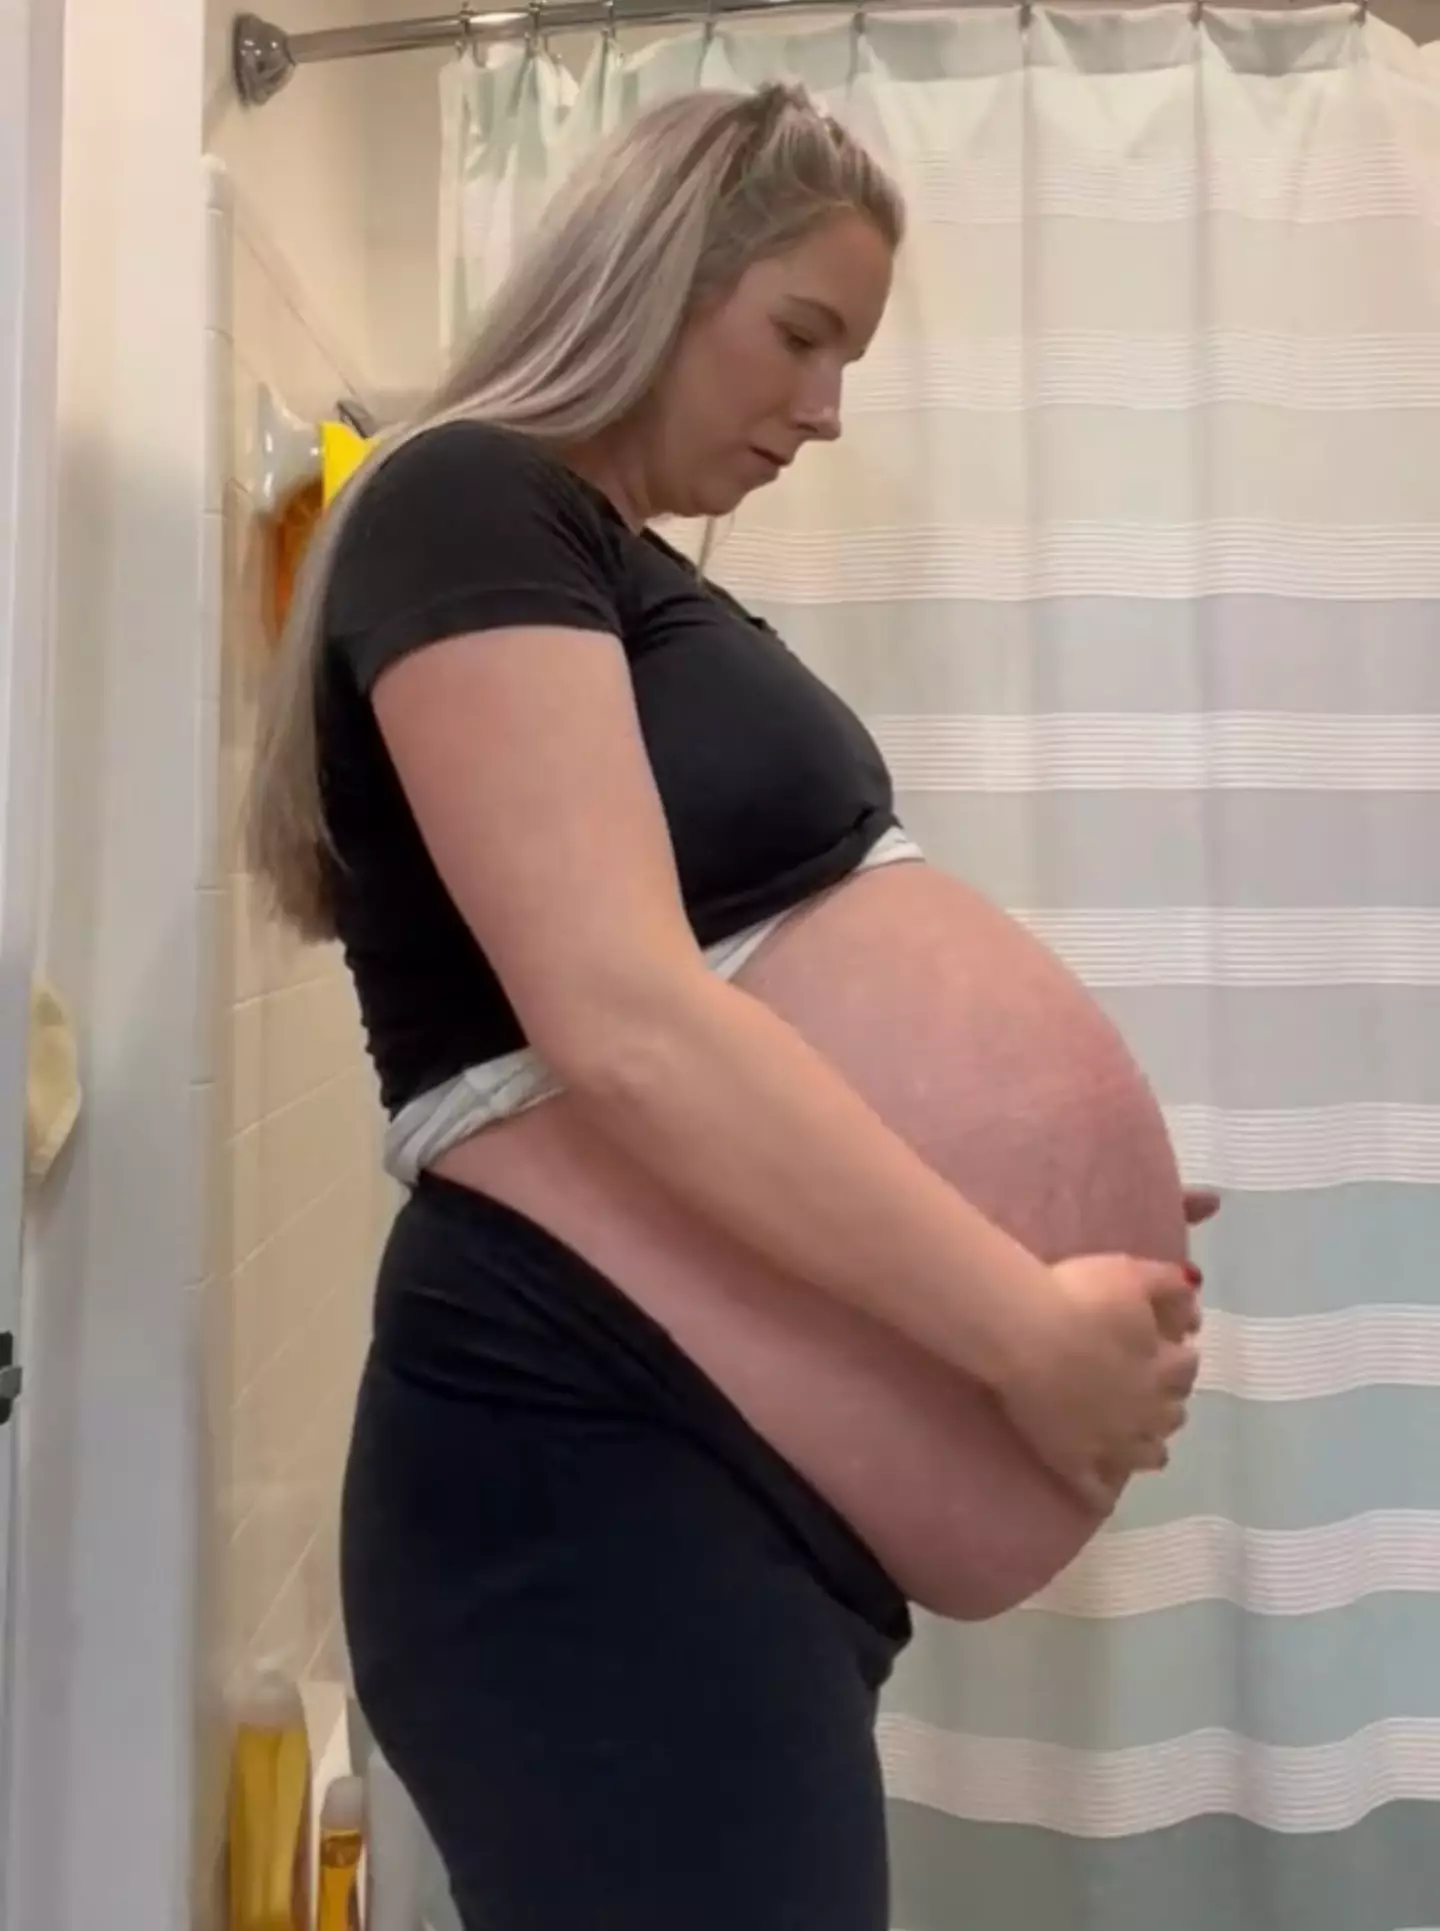 Brittany Schneider's baby bump size was compared to a 'mansion'.